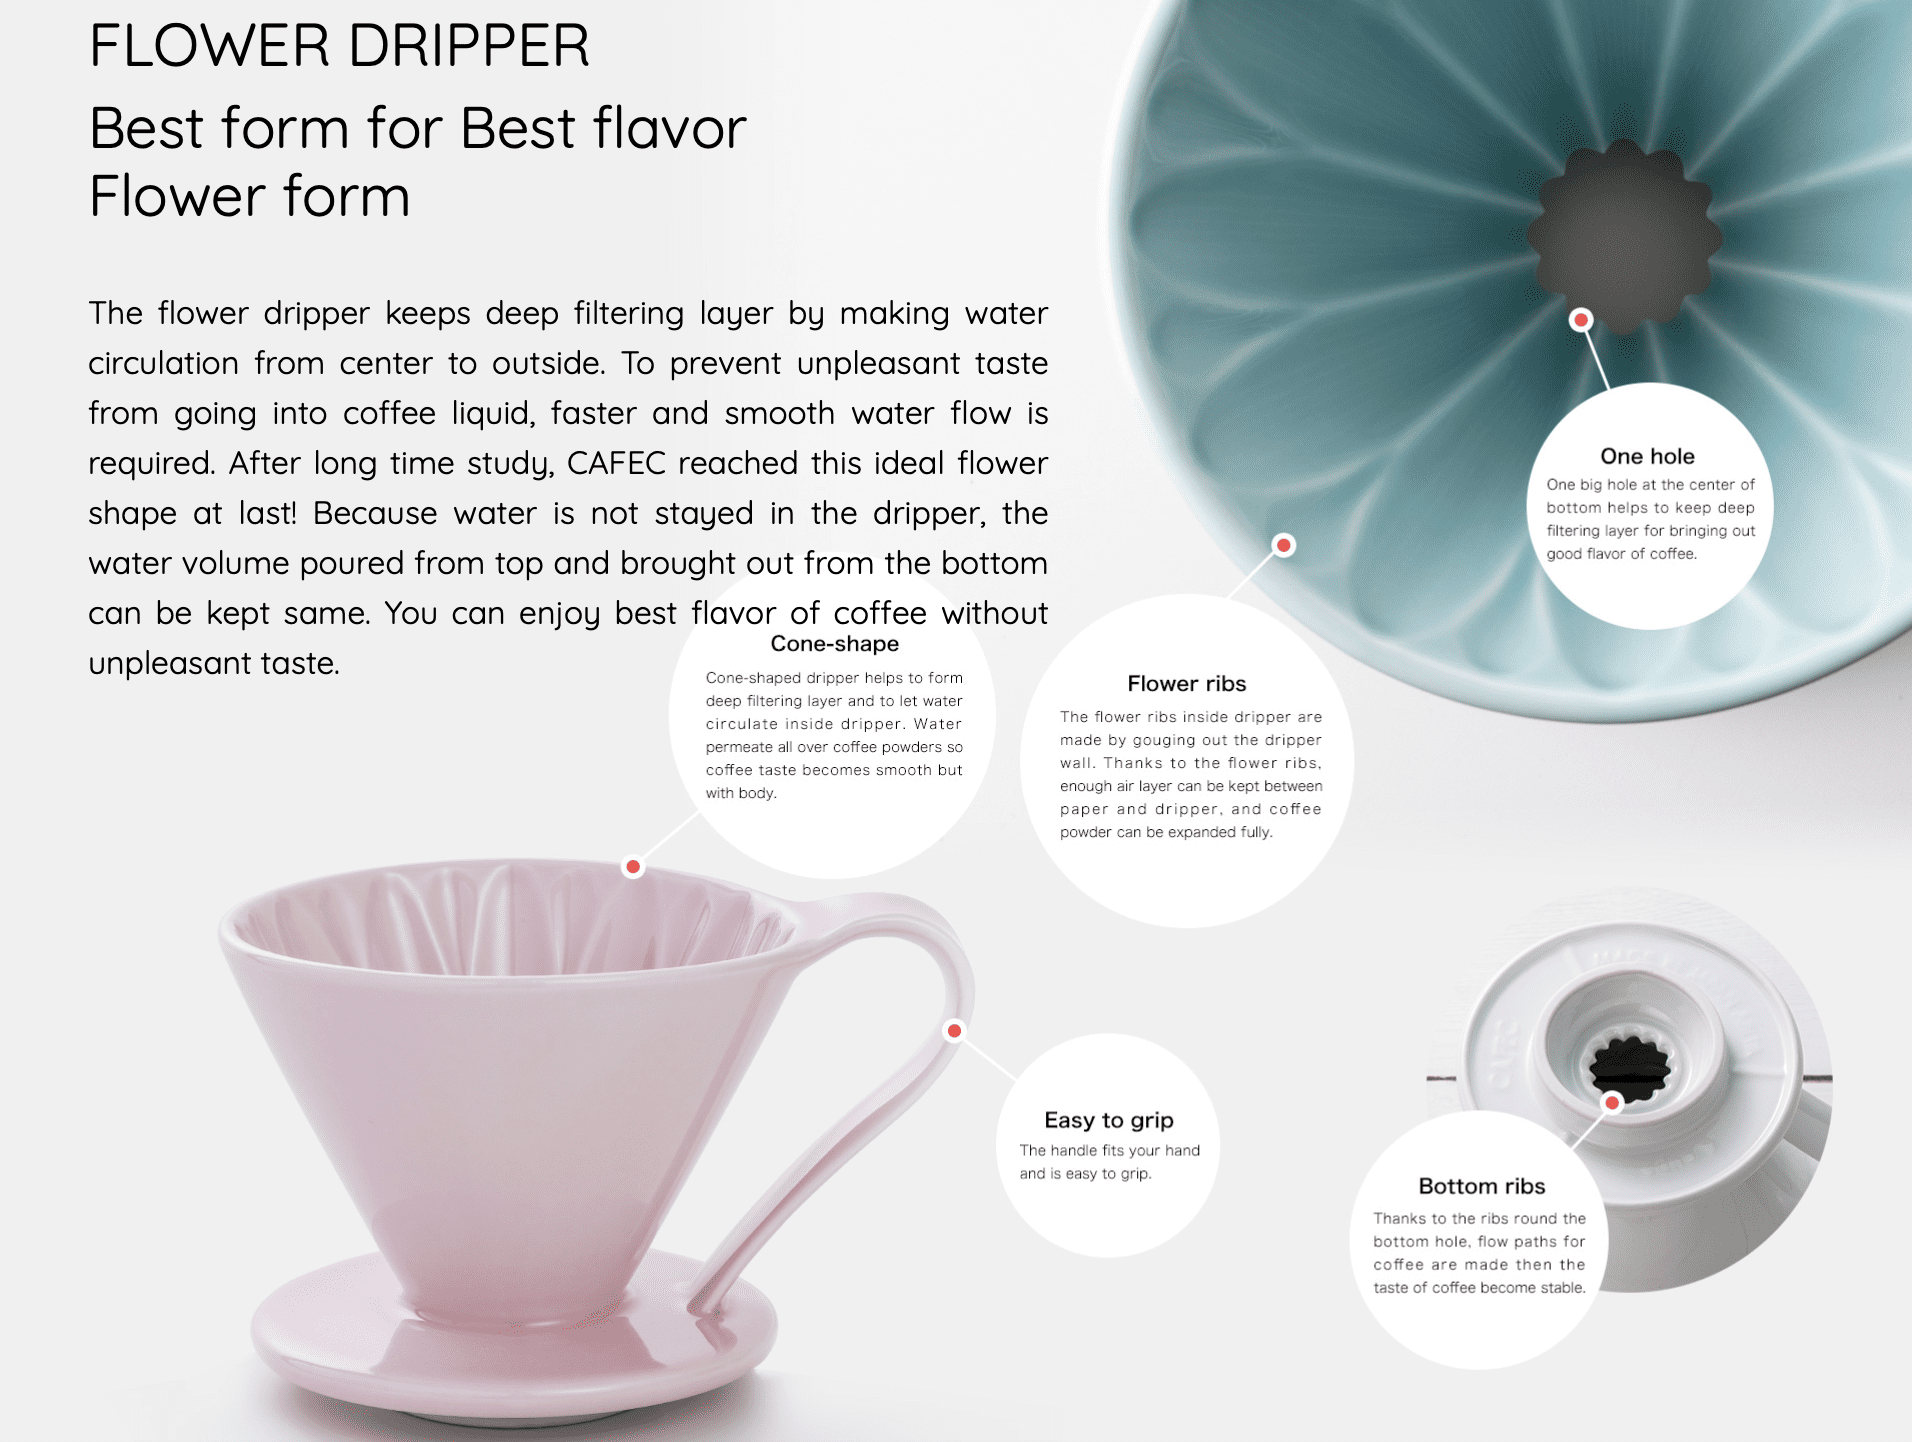 Elegant Smart Design: Better Brewing Blue Unique Drip Coffee Maker For Fresh Filter Coffee Pour Over Coffee Dripper by Sanyo Sangyo: Porcelain Ceramic 1-to-4 Cup Brewer In 5 Beautiful COLORS 